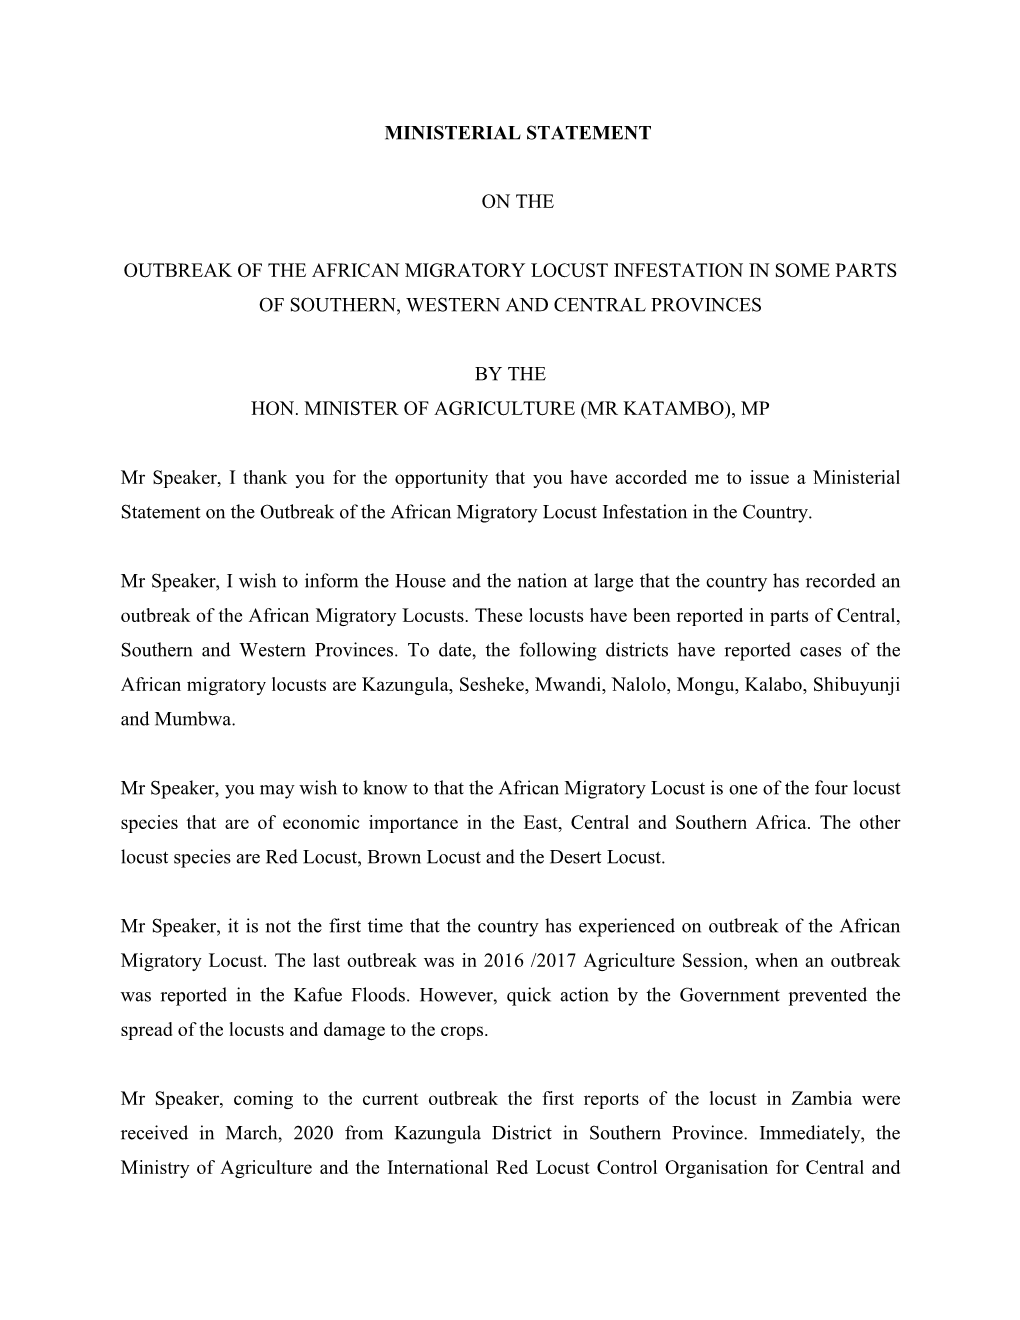 Ministerial Statement on the Outbreak of the African Migratory Locust Infestation in the Country